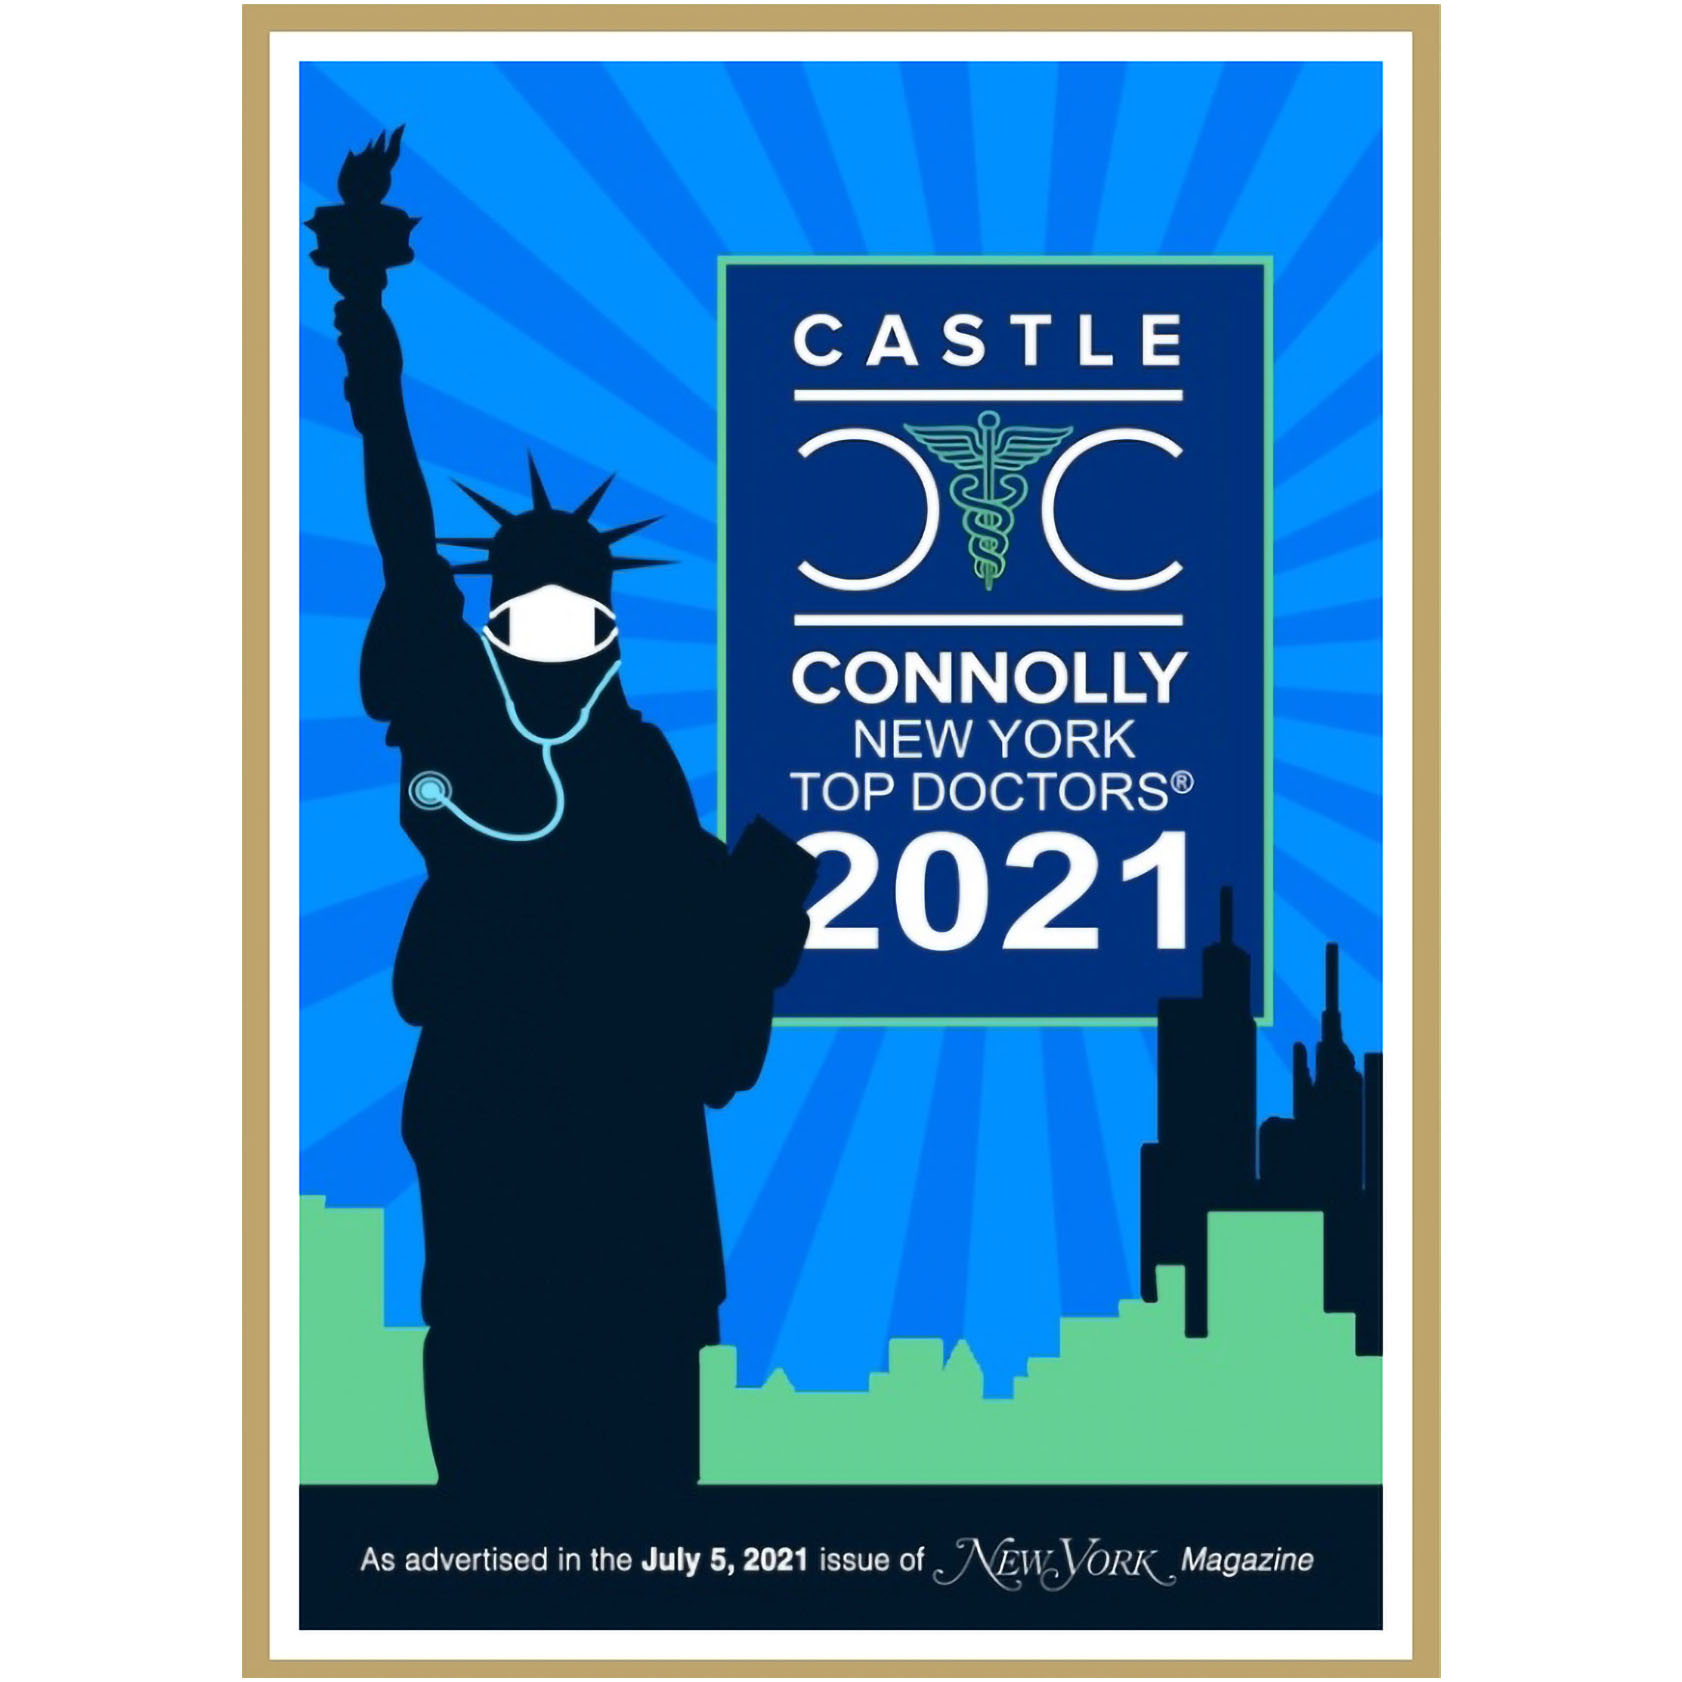 Castle Connolly New York Top Doctors 2021